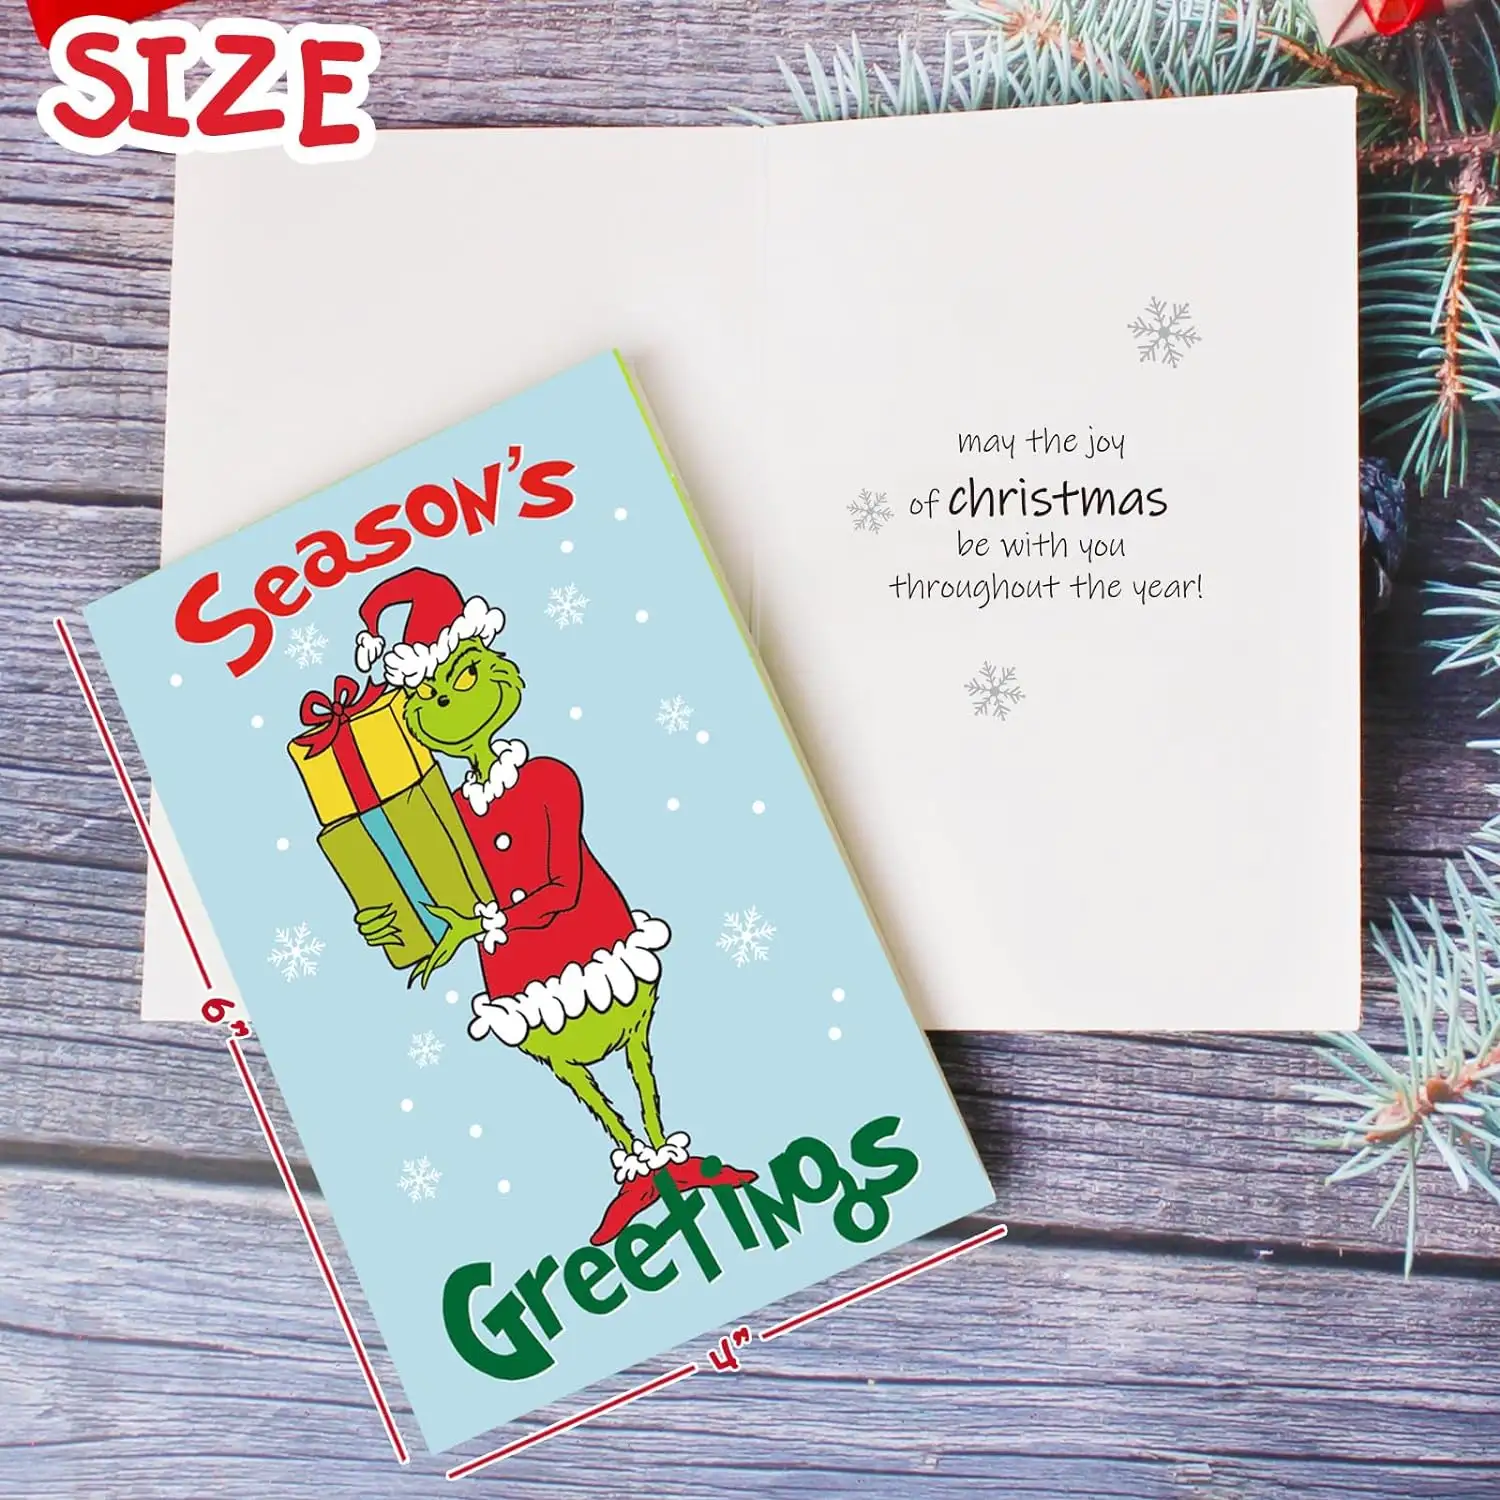 Set of 30 Grinchs Cards Bulk Boxed with Envelopes and Stickers,6 Assorted Designs Grinchs Christmas Cards, Holiday Christmas